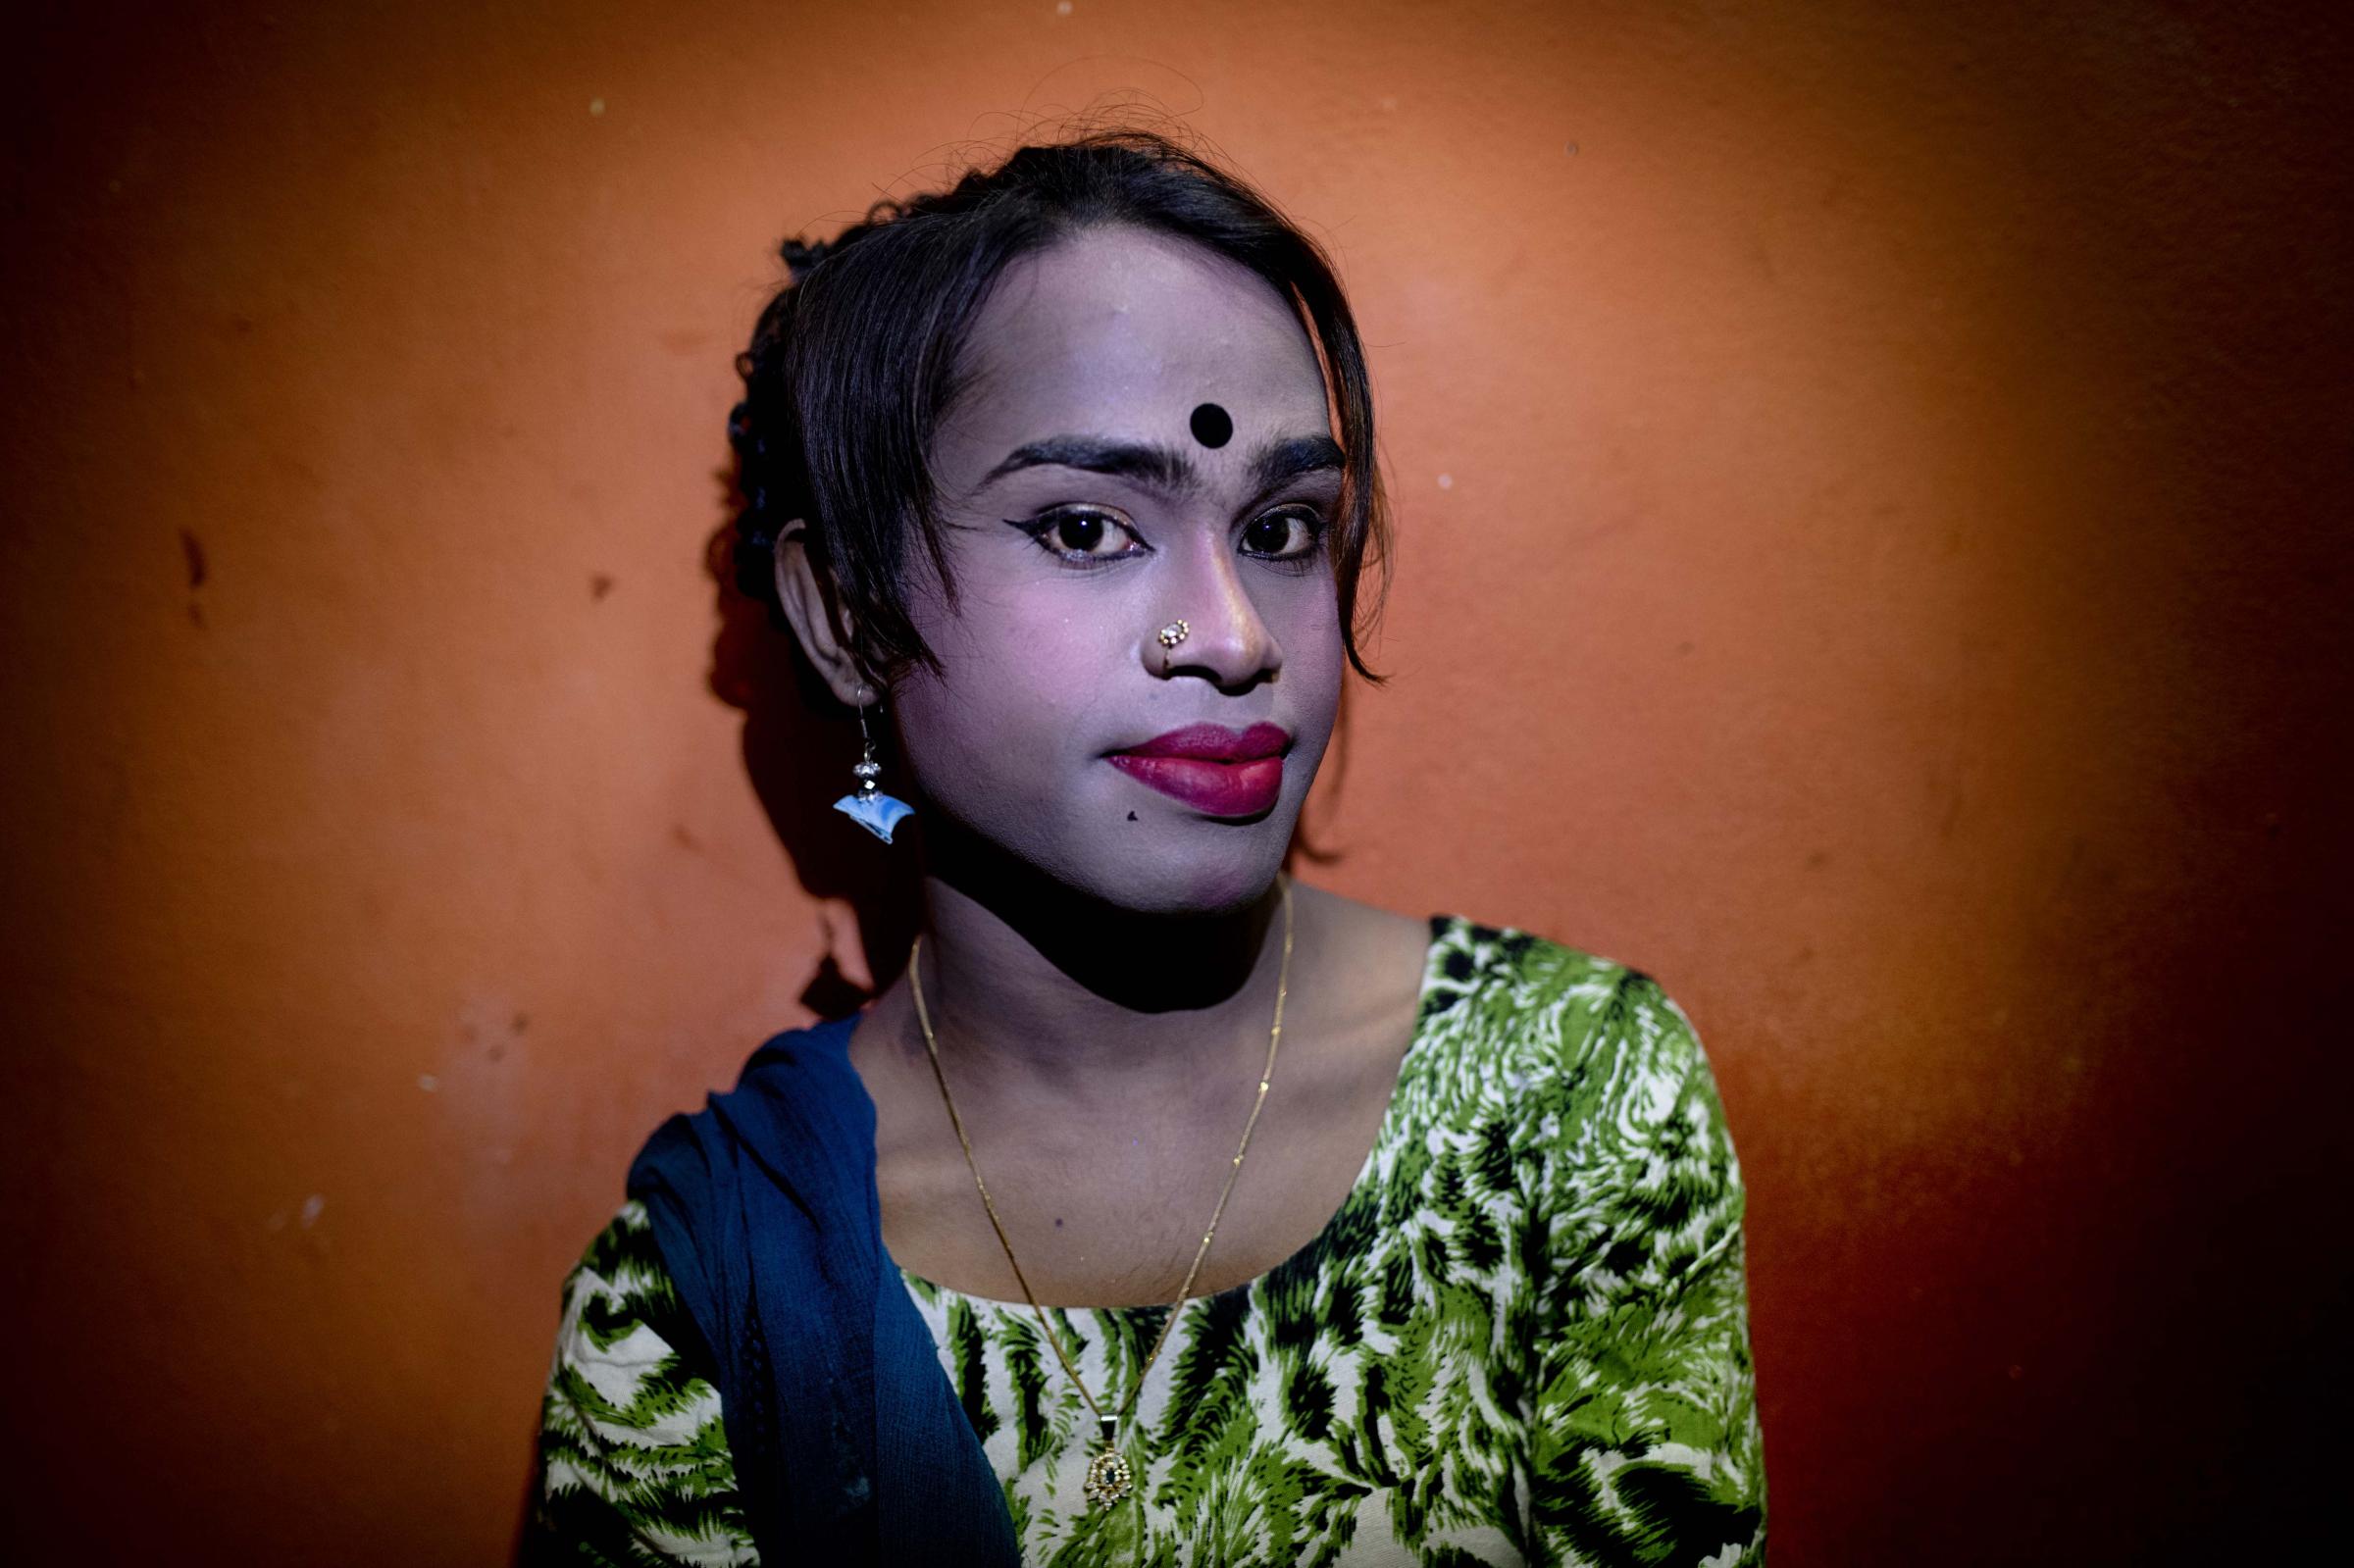 Neither Man nor Woman - Munni a transgender poses for a photographer, she took a...